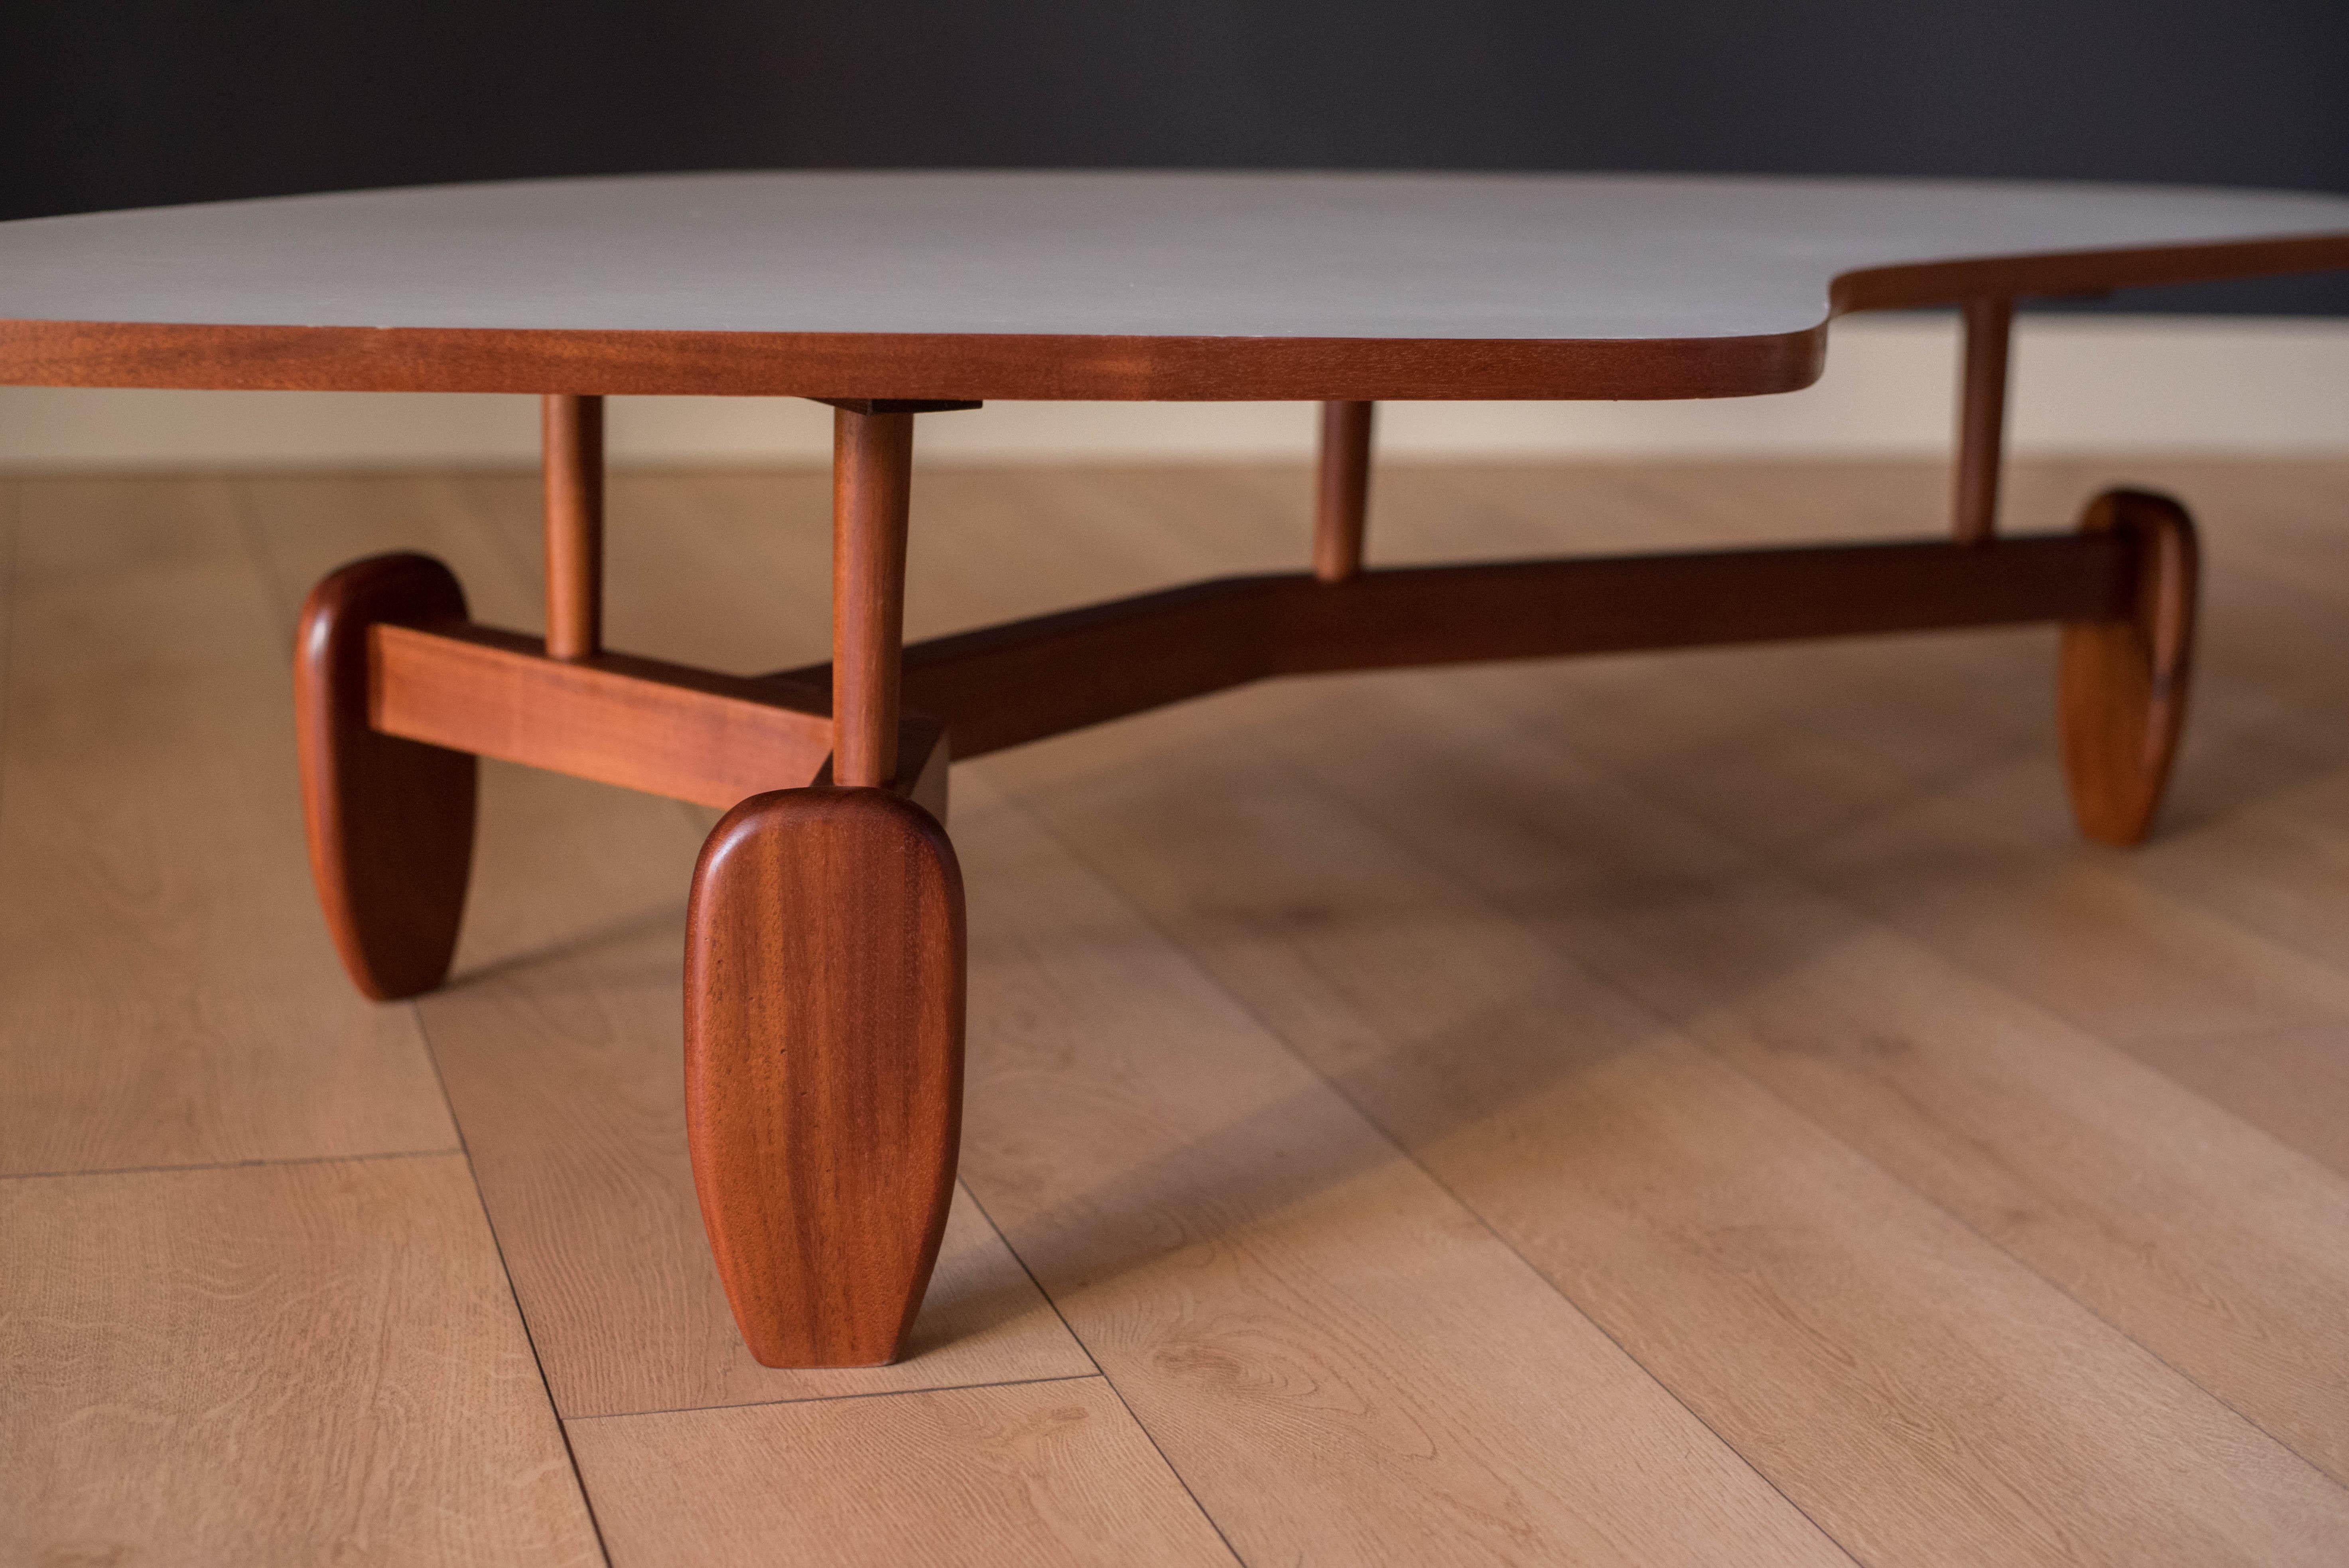 outrigger table